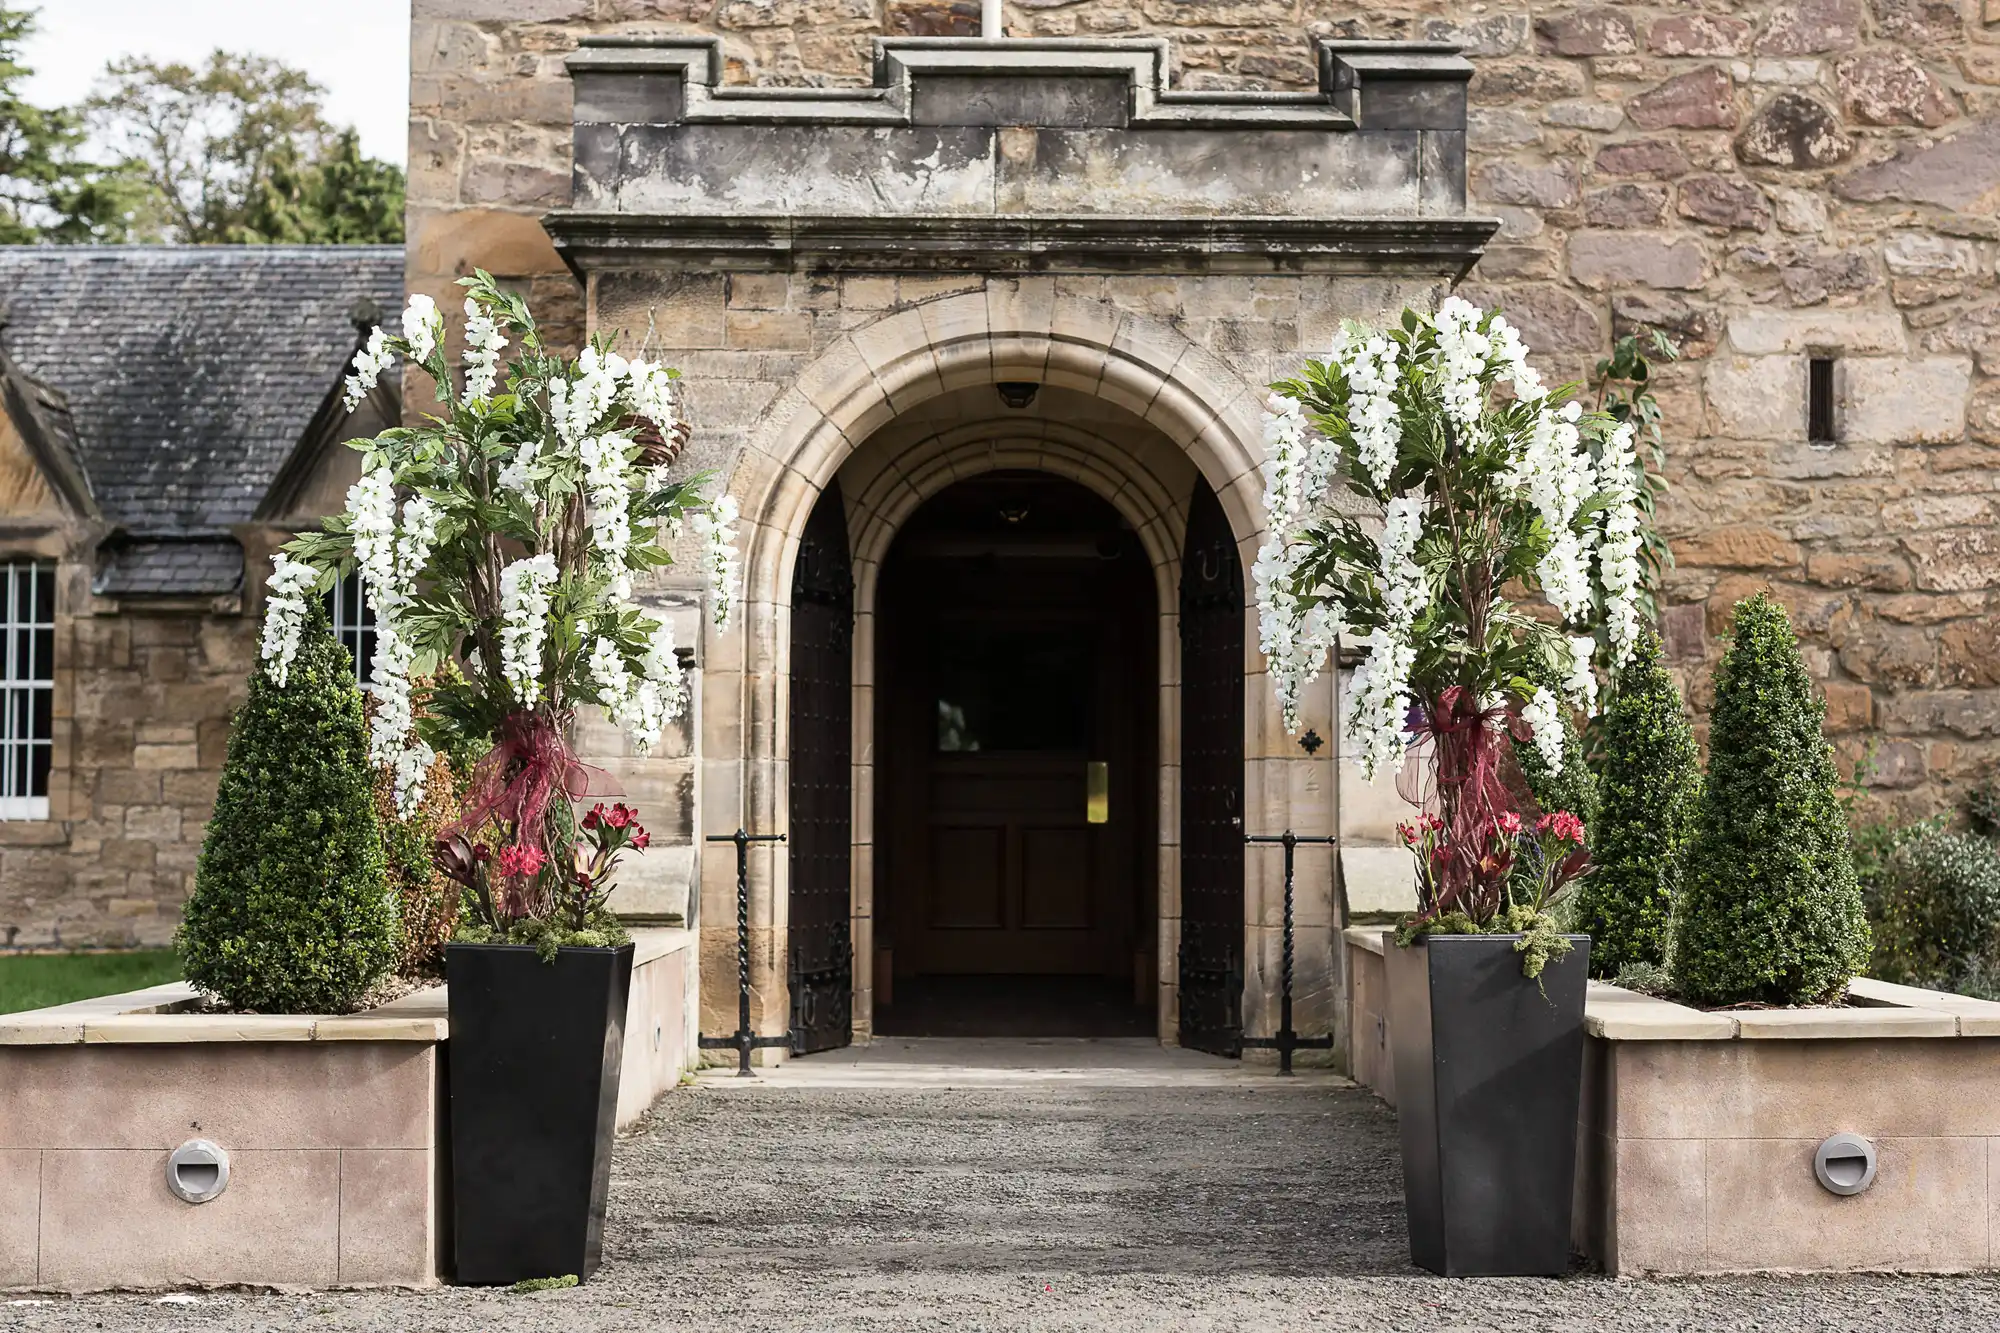 Arched stone entrance of an historic building flanked by ornate planters with white flowers and greenery.